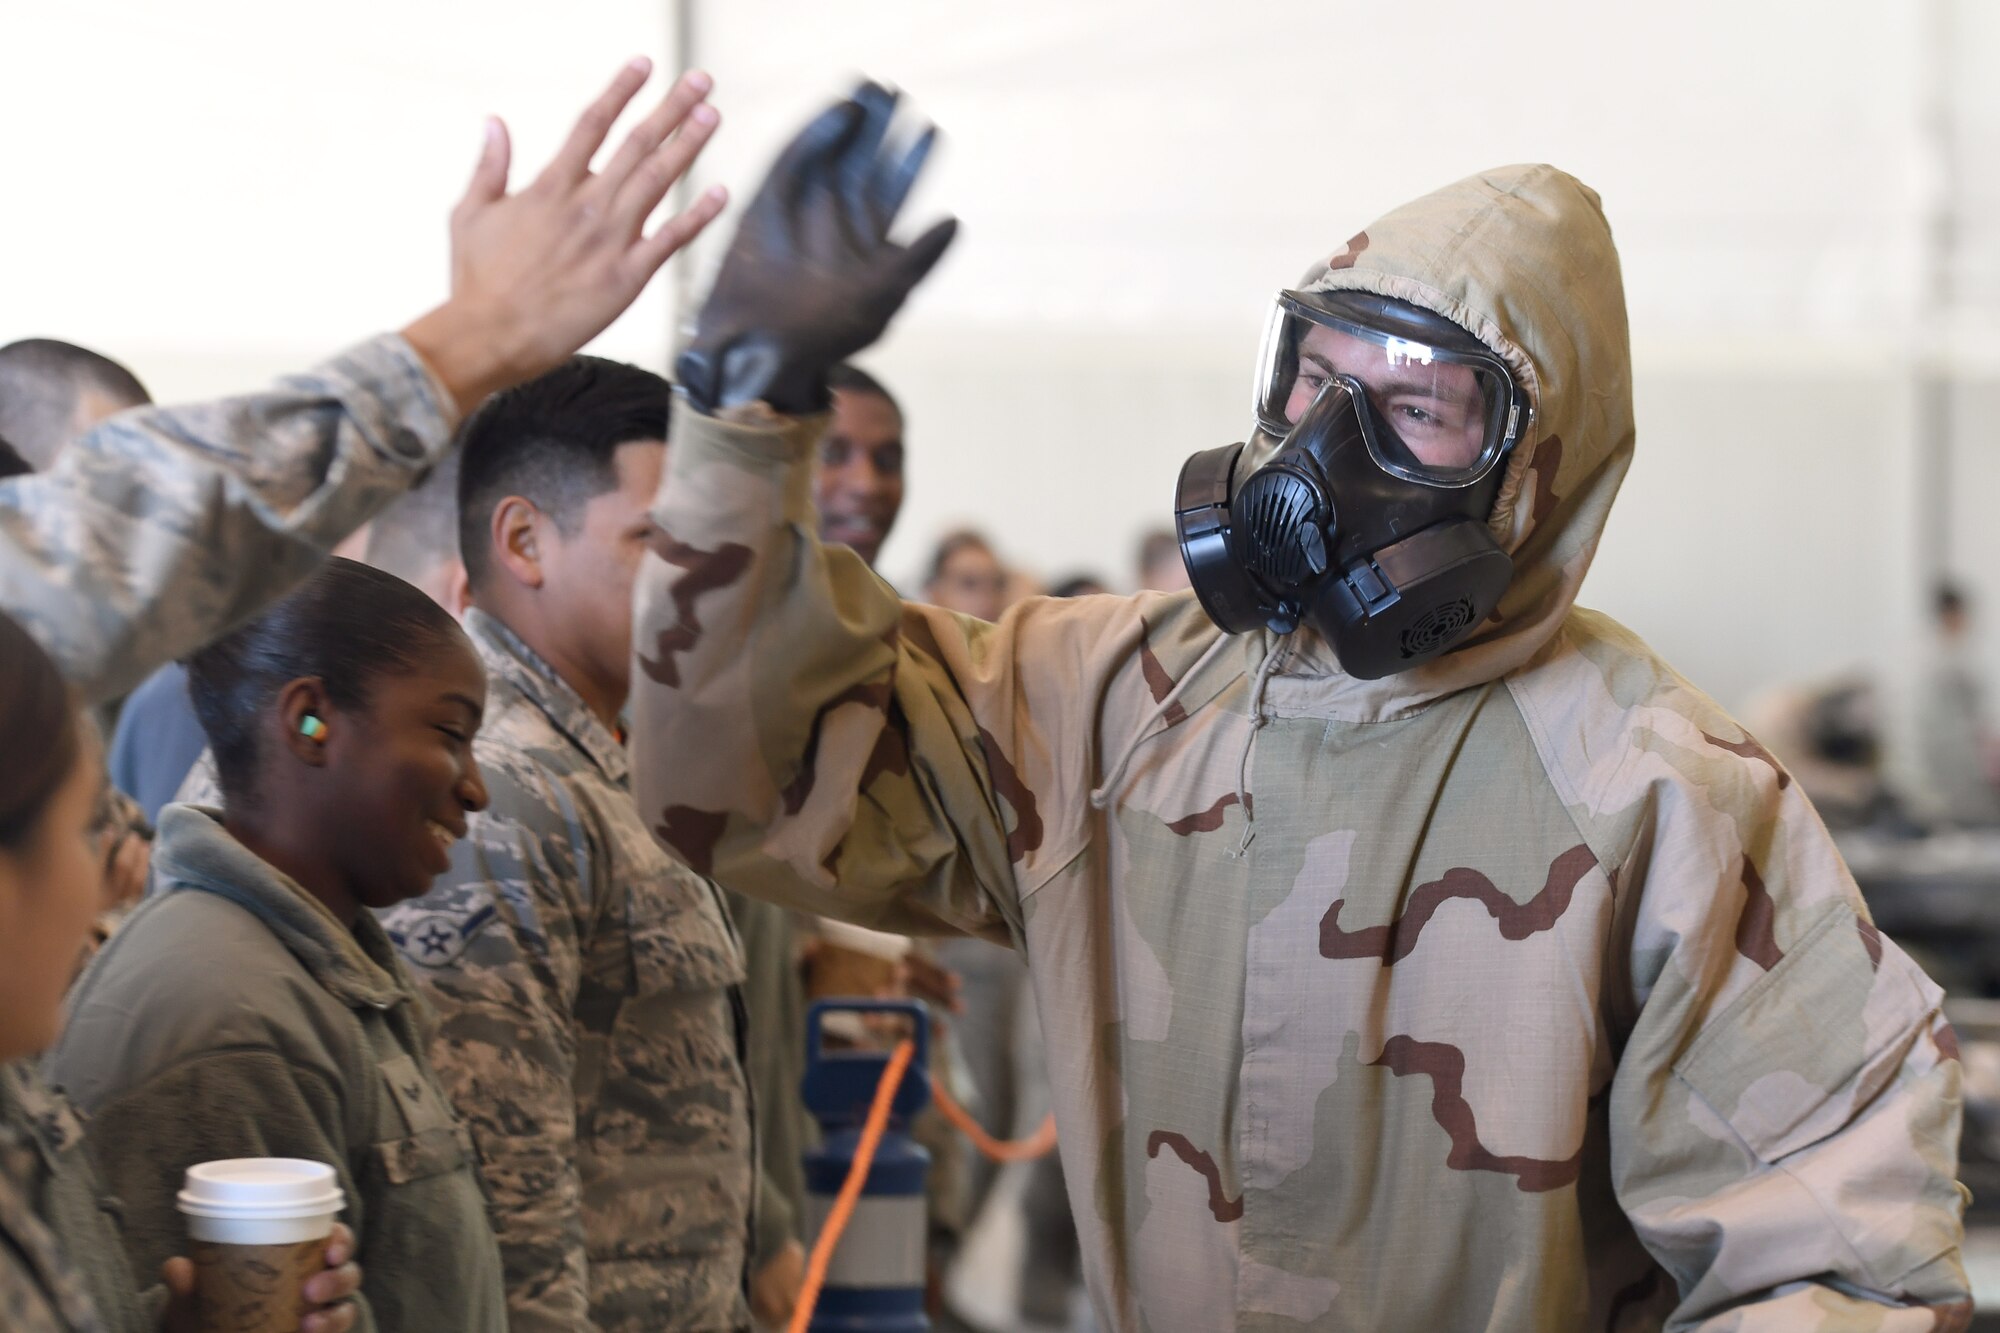 An Airman assigned to the 432nd Aircraft Maintenance Squadron Tiger Aircraft Maintenance Unit celebrates with audience members after winning the weapons load competition Dec. 8, 2017, at Creech Air Force Base, Nev. The 432nd Wing set programs such as chemical, biological, radiological, nuclear and explosives training in place to prepare MQ-1 Predator and MQ-9 Reaper aircrews to win a fight in any condition. (U.S. Air Force photo by Senior Airman James Thompson)